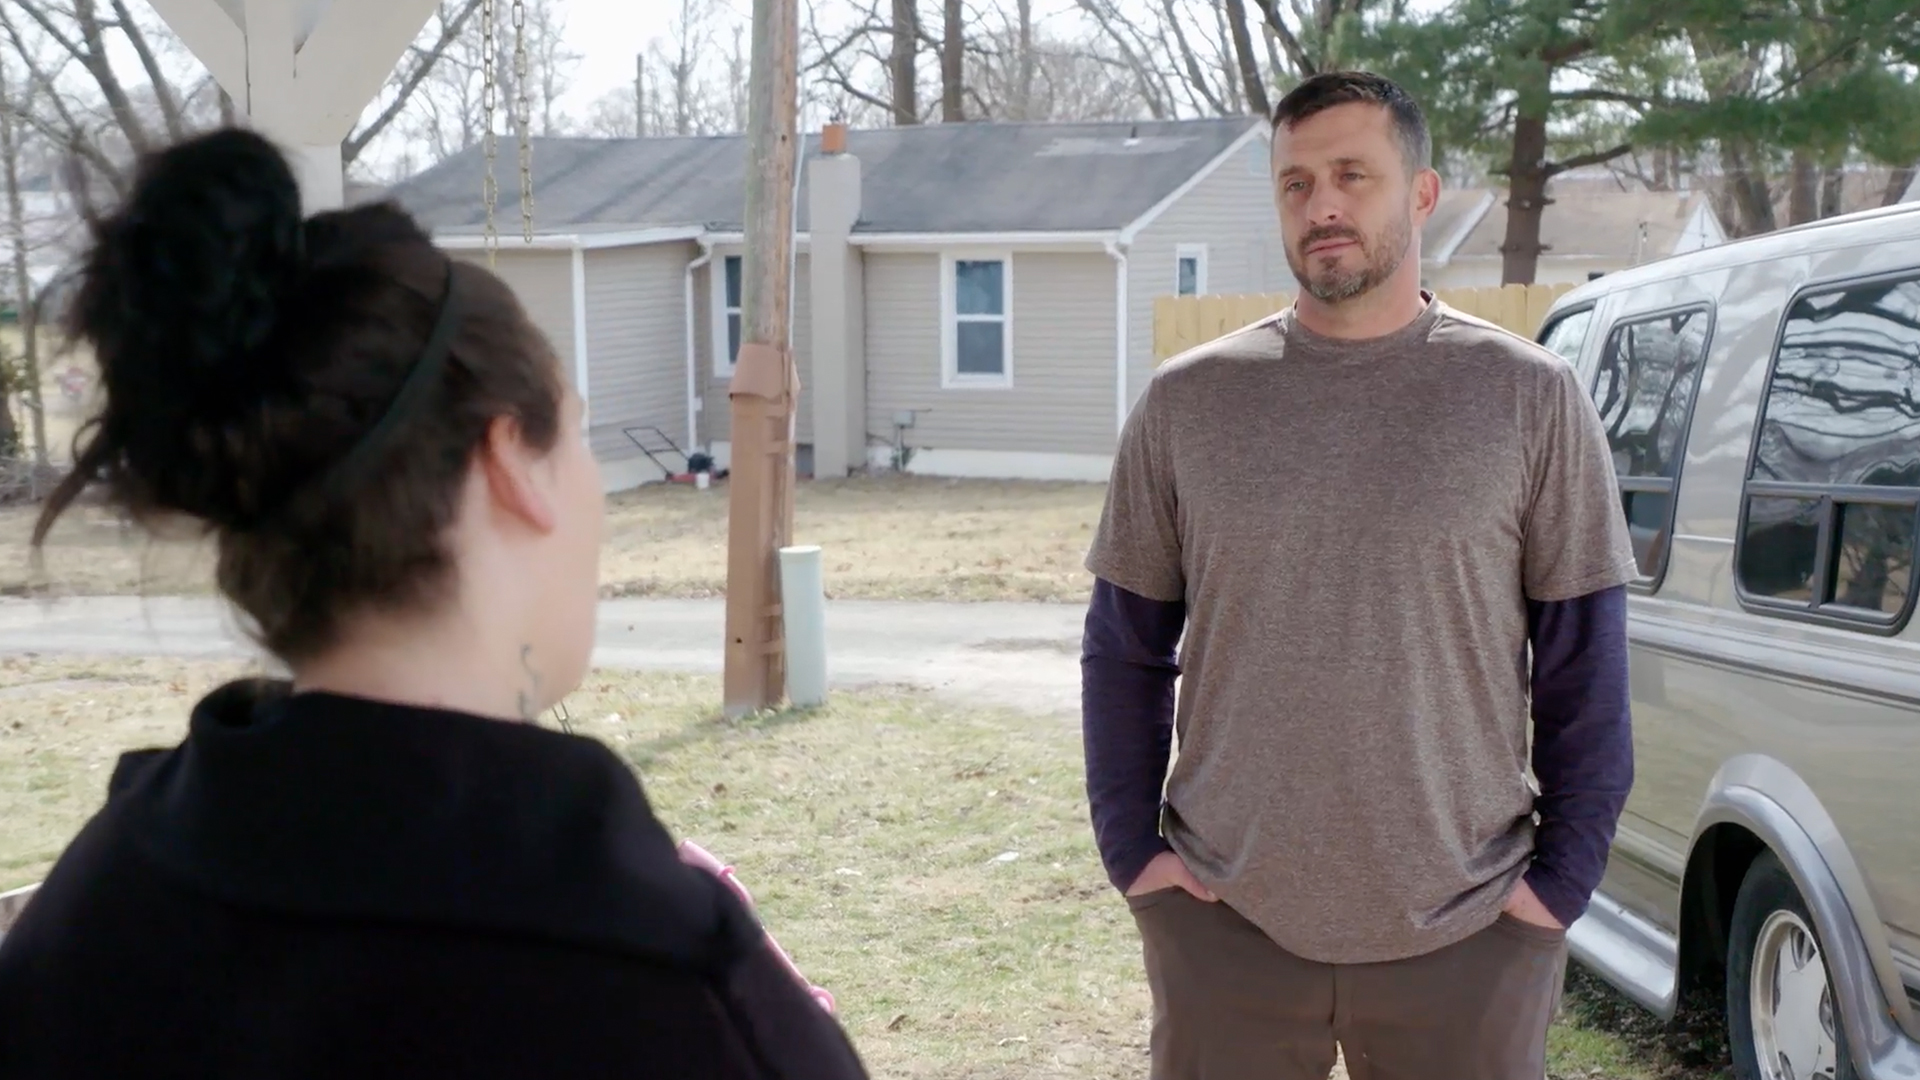 Watch Sneak Peek: Chance & Tayler's Sister Face Off | Love After Lockup Video Extras